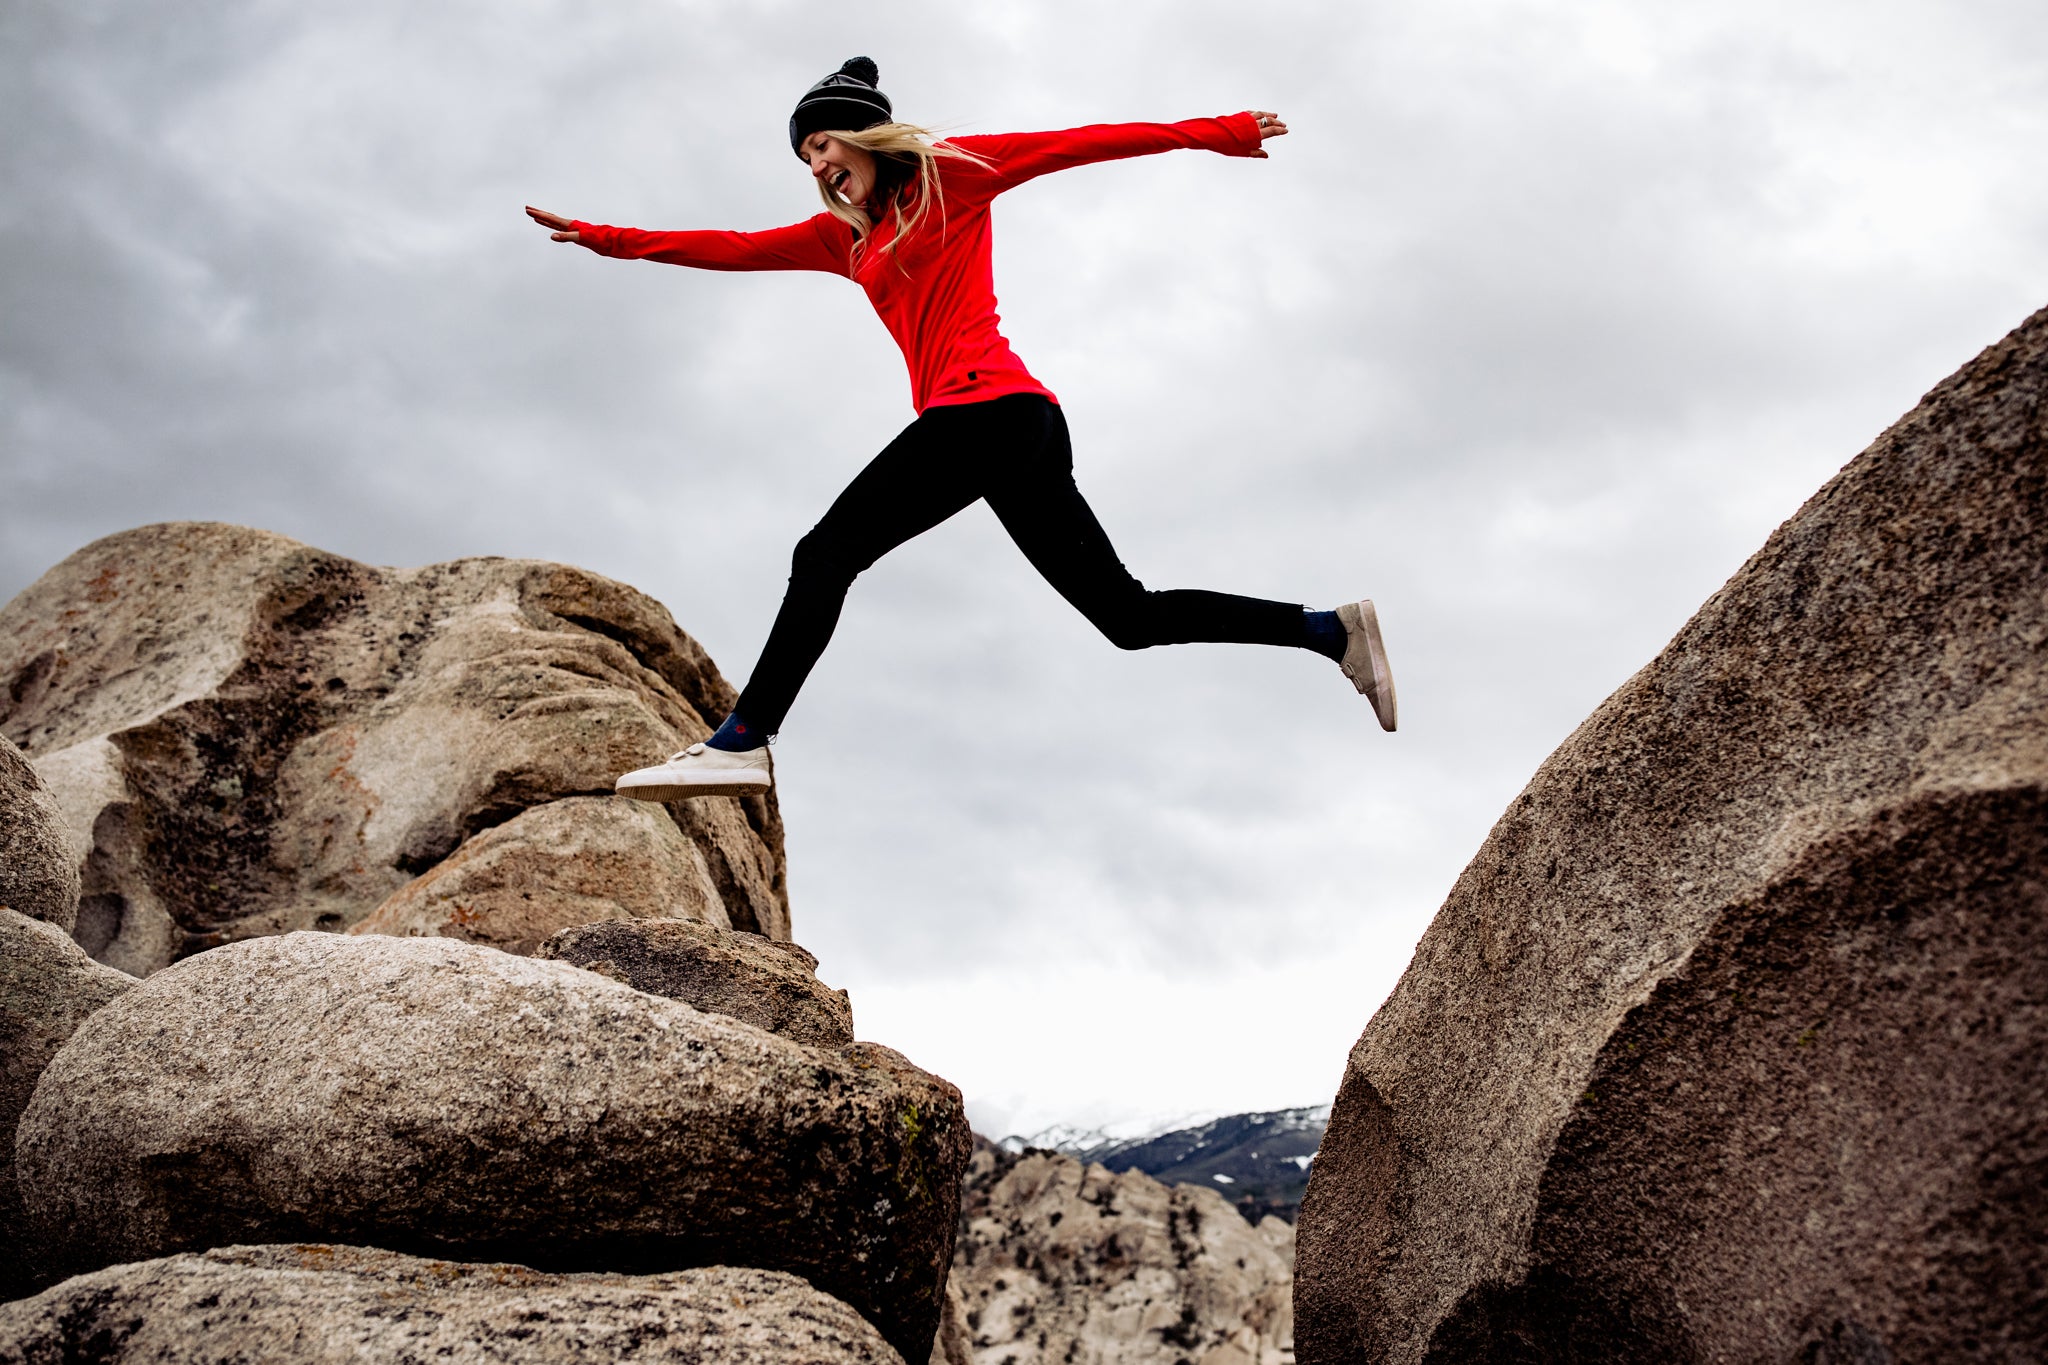 Ridge Base Layers Named "Best Thermal Underwear" by  New York Times Wirecutter